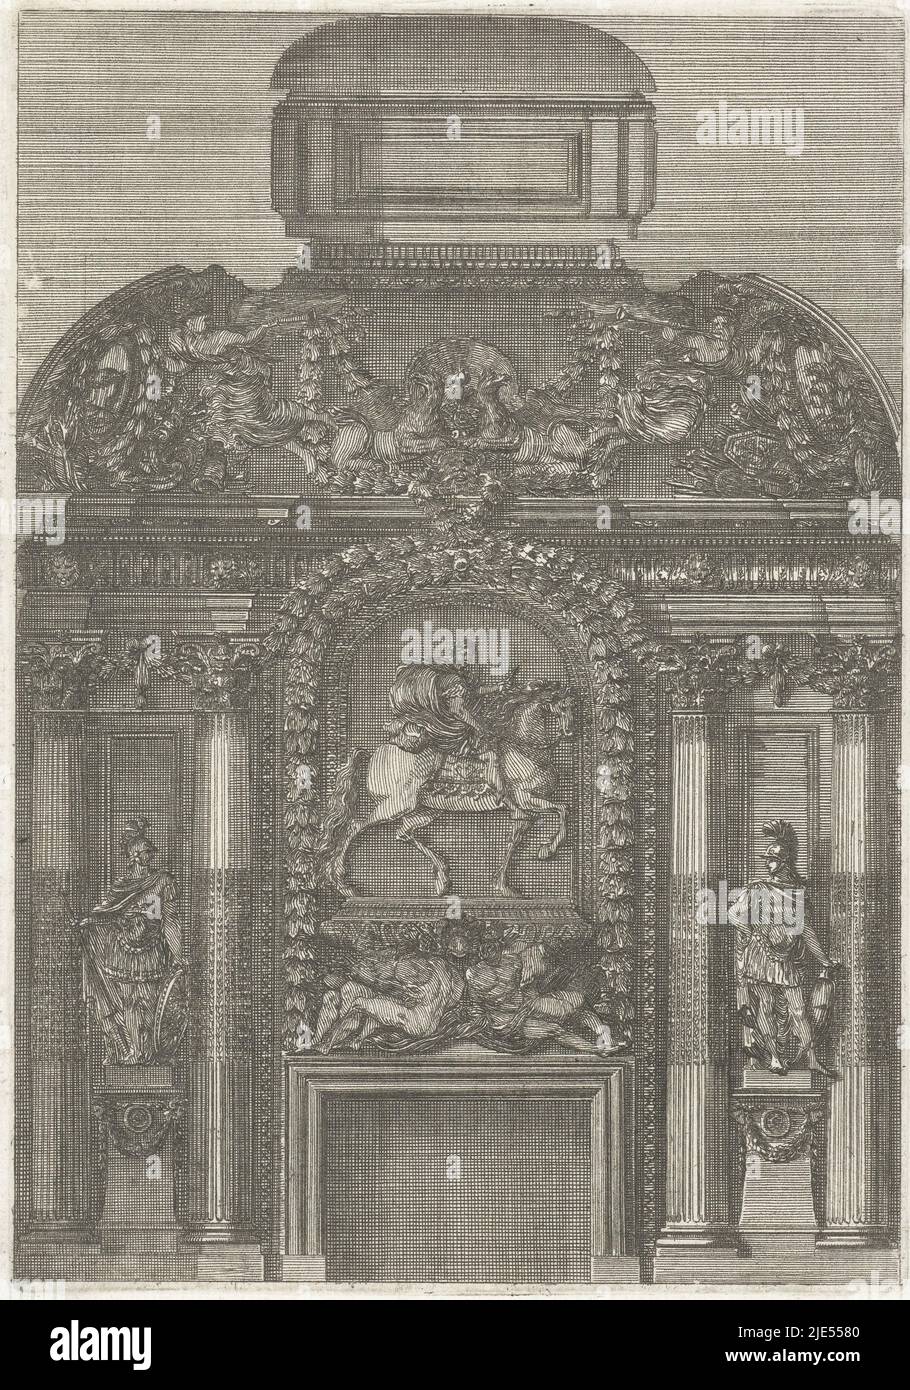 In the centre, a horseman is depicted above two bound slaves, recessed Corinthian columns with the statue of a Roman general in between. From series of 12 sheets, Chimney atrium (series title), print maker: Jean Lepautre, Jean Lepautre, publisher: Jean Leblond (I), print maker: France, (possibly), France, (possibly), publisher: Paris, c. 1651, paper, etching, h 193 mm × w 135 mm Stock Photo